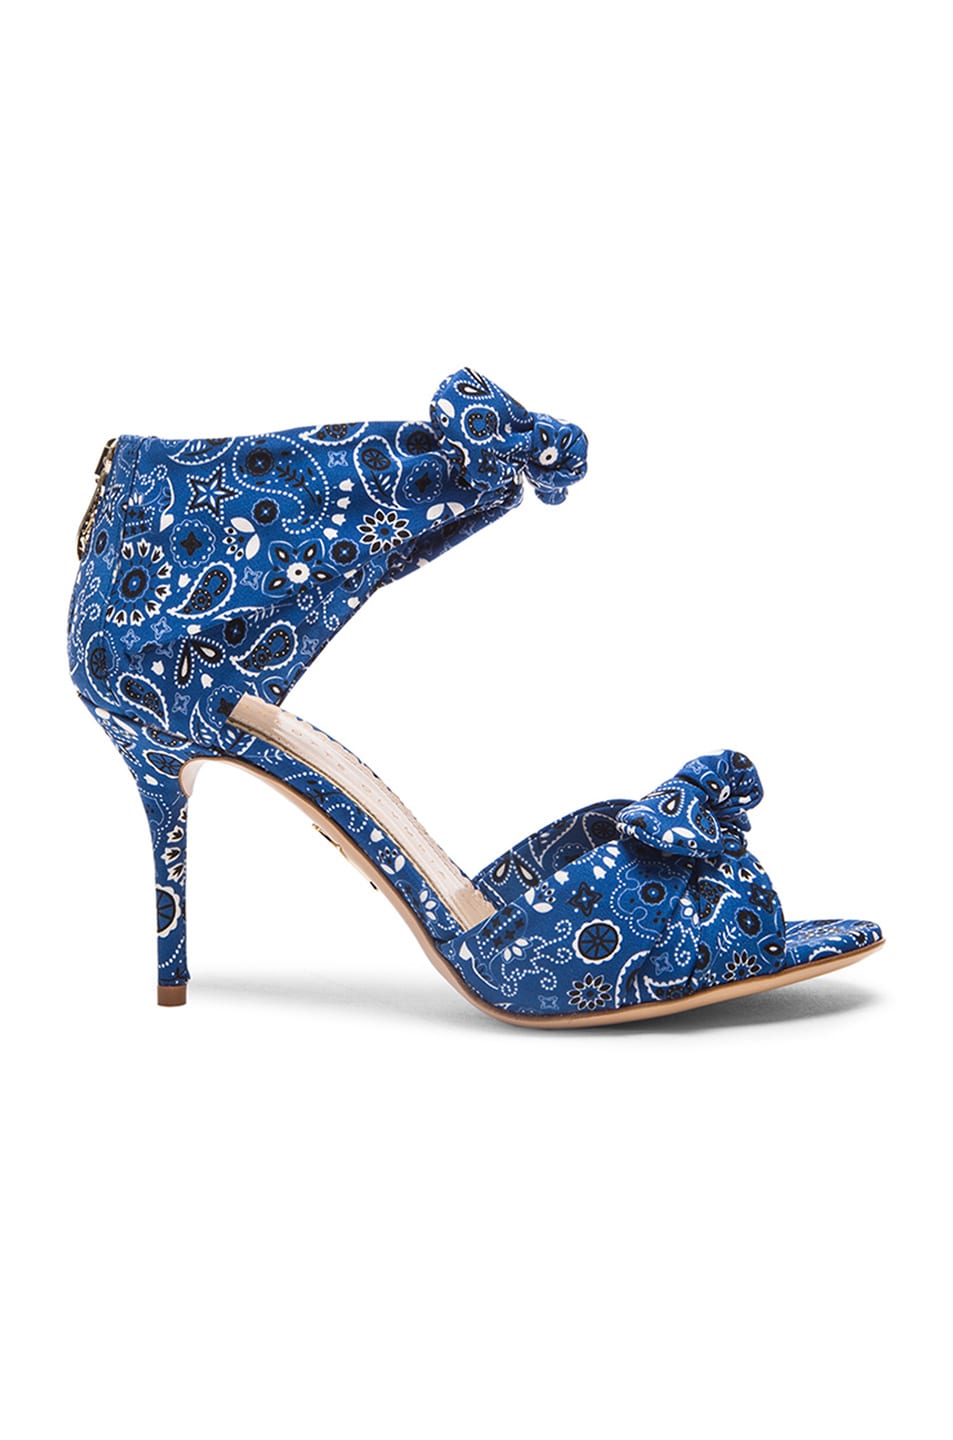 Image 1 of Charlotte Olympia Patty Crepe de Chine Heels in Bucking Blue